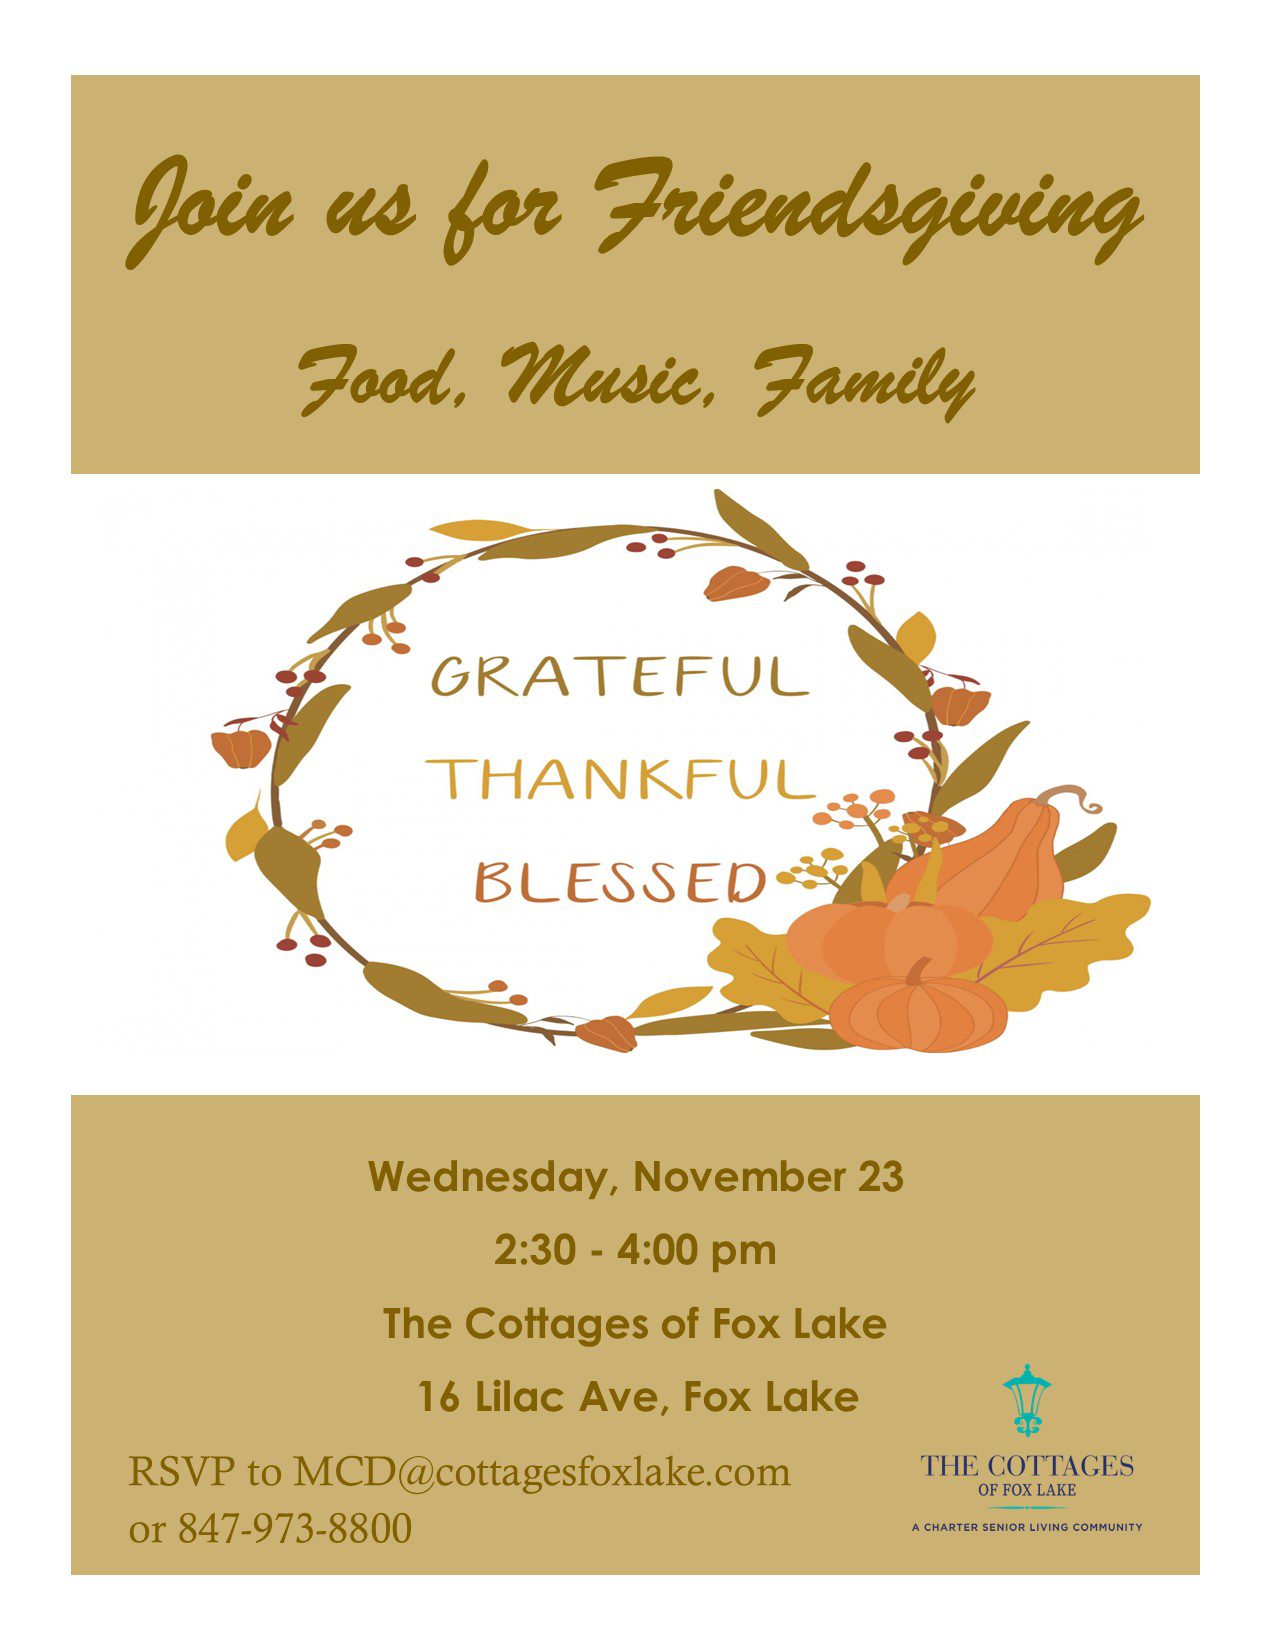 Cottages of Fox Lake - Assisted Living and Memory Care - Friendsgiving